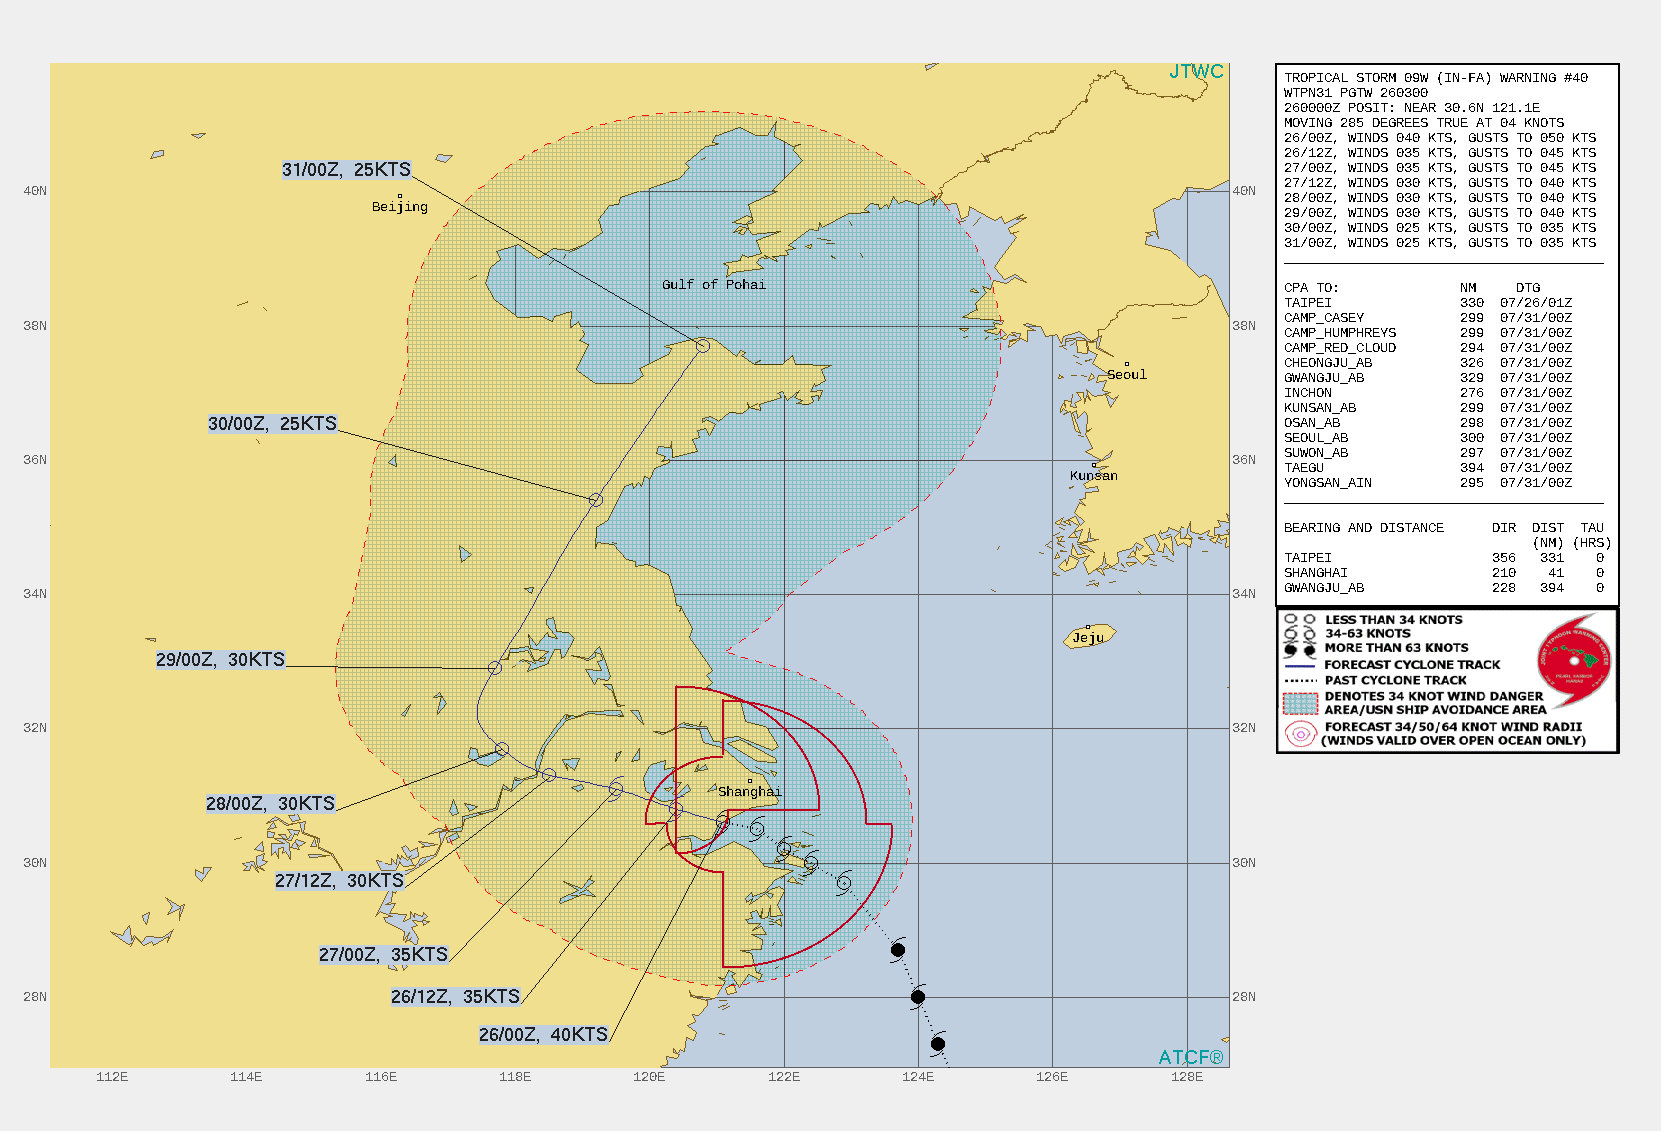 TS 09W(IN-FA). WARNING 40 ISSUED AT 26/03UTC.THERE ARE NO SIGNIFICANT CHANGES TO THE FORECAST FROM THE PREVIOUS WARNING.  FORECAST DISCUSSION: TS 09W WILL CONTINUE WEST-NORTHWESTWARD INTO THE CHINESE INTERIOR THEN RECURVE NORTHEASTWARD AFTER 48H AS IT ROUNDS THE WESTERN EDGE OF THE SUBTROPICAL RIDGE. LAND INTERACTION WILL MOSTLY BE RESPONSIBLE FOR ITS GRADUAL DECAY DOWN TO 25KNOTS BY 120H AS IT REACHES THE TIP OF SHANDONG PENINSULA AND POISED TO MAKE AN EXIT INTO THE GULF OF POHAI. THERE IS, HOWEVER, A POSSIBILITY THAT THE SYSTEM WILL DISSIPATE OVER LAND.